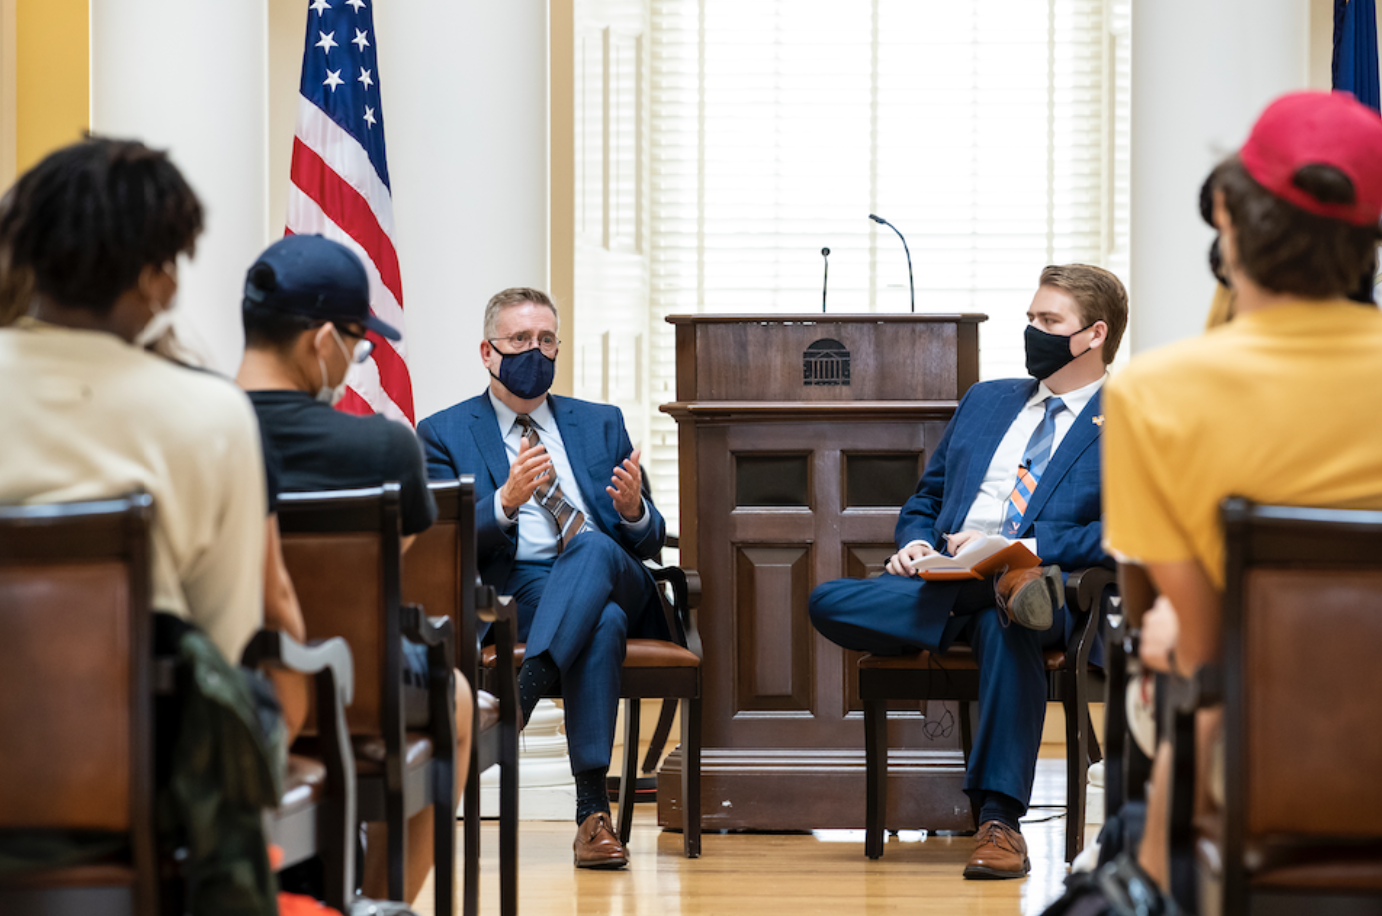 Batten student Ethan Betterton (MPP ’22), VPR managing editor, interviewed Washington Post Supreme Court reporter Bob Barnes at an event hosted by VPR earlier this semester. (Photo by Ben Leistensnider)